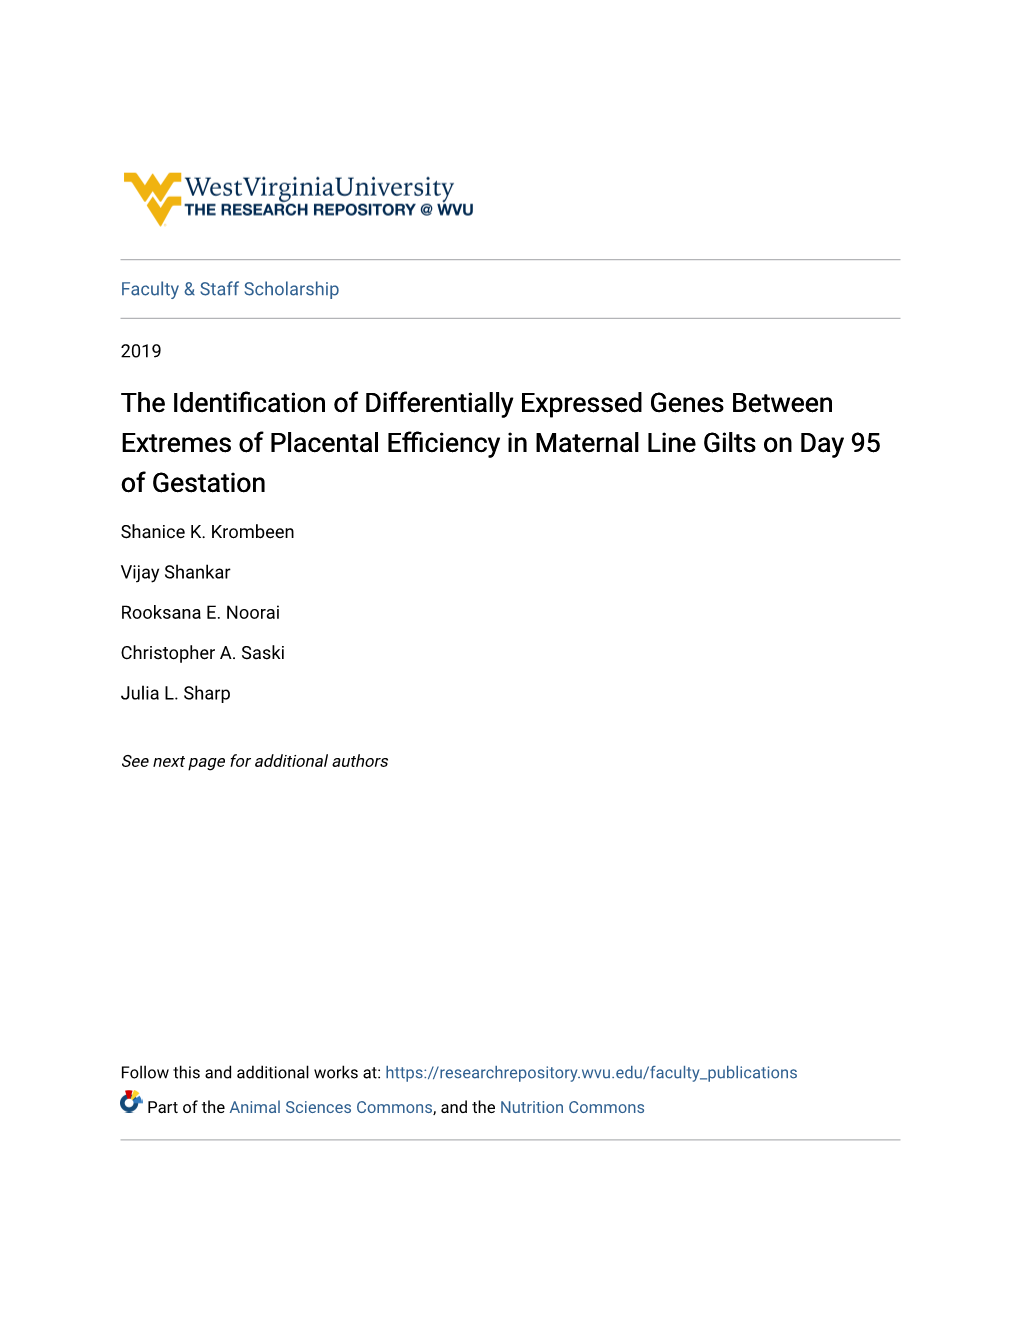 The Identification of Differentially Expressed Genes Between Extremes of Placental Efficiency in Maternal Line Gilts on Yda 95 of Gestation